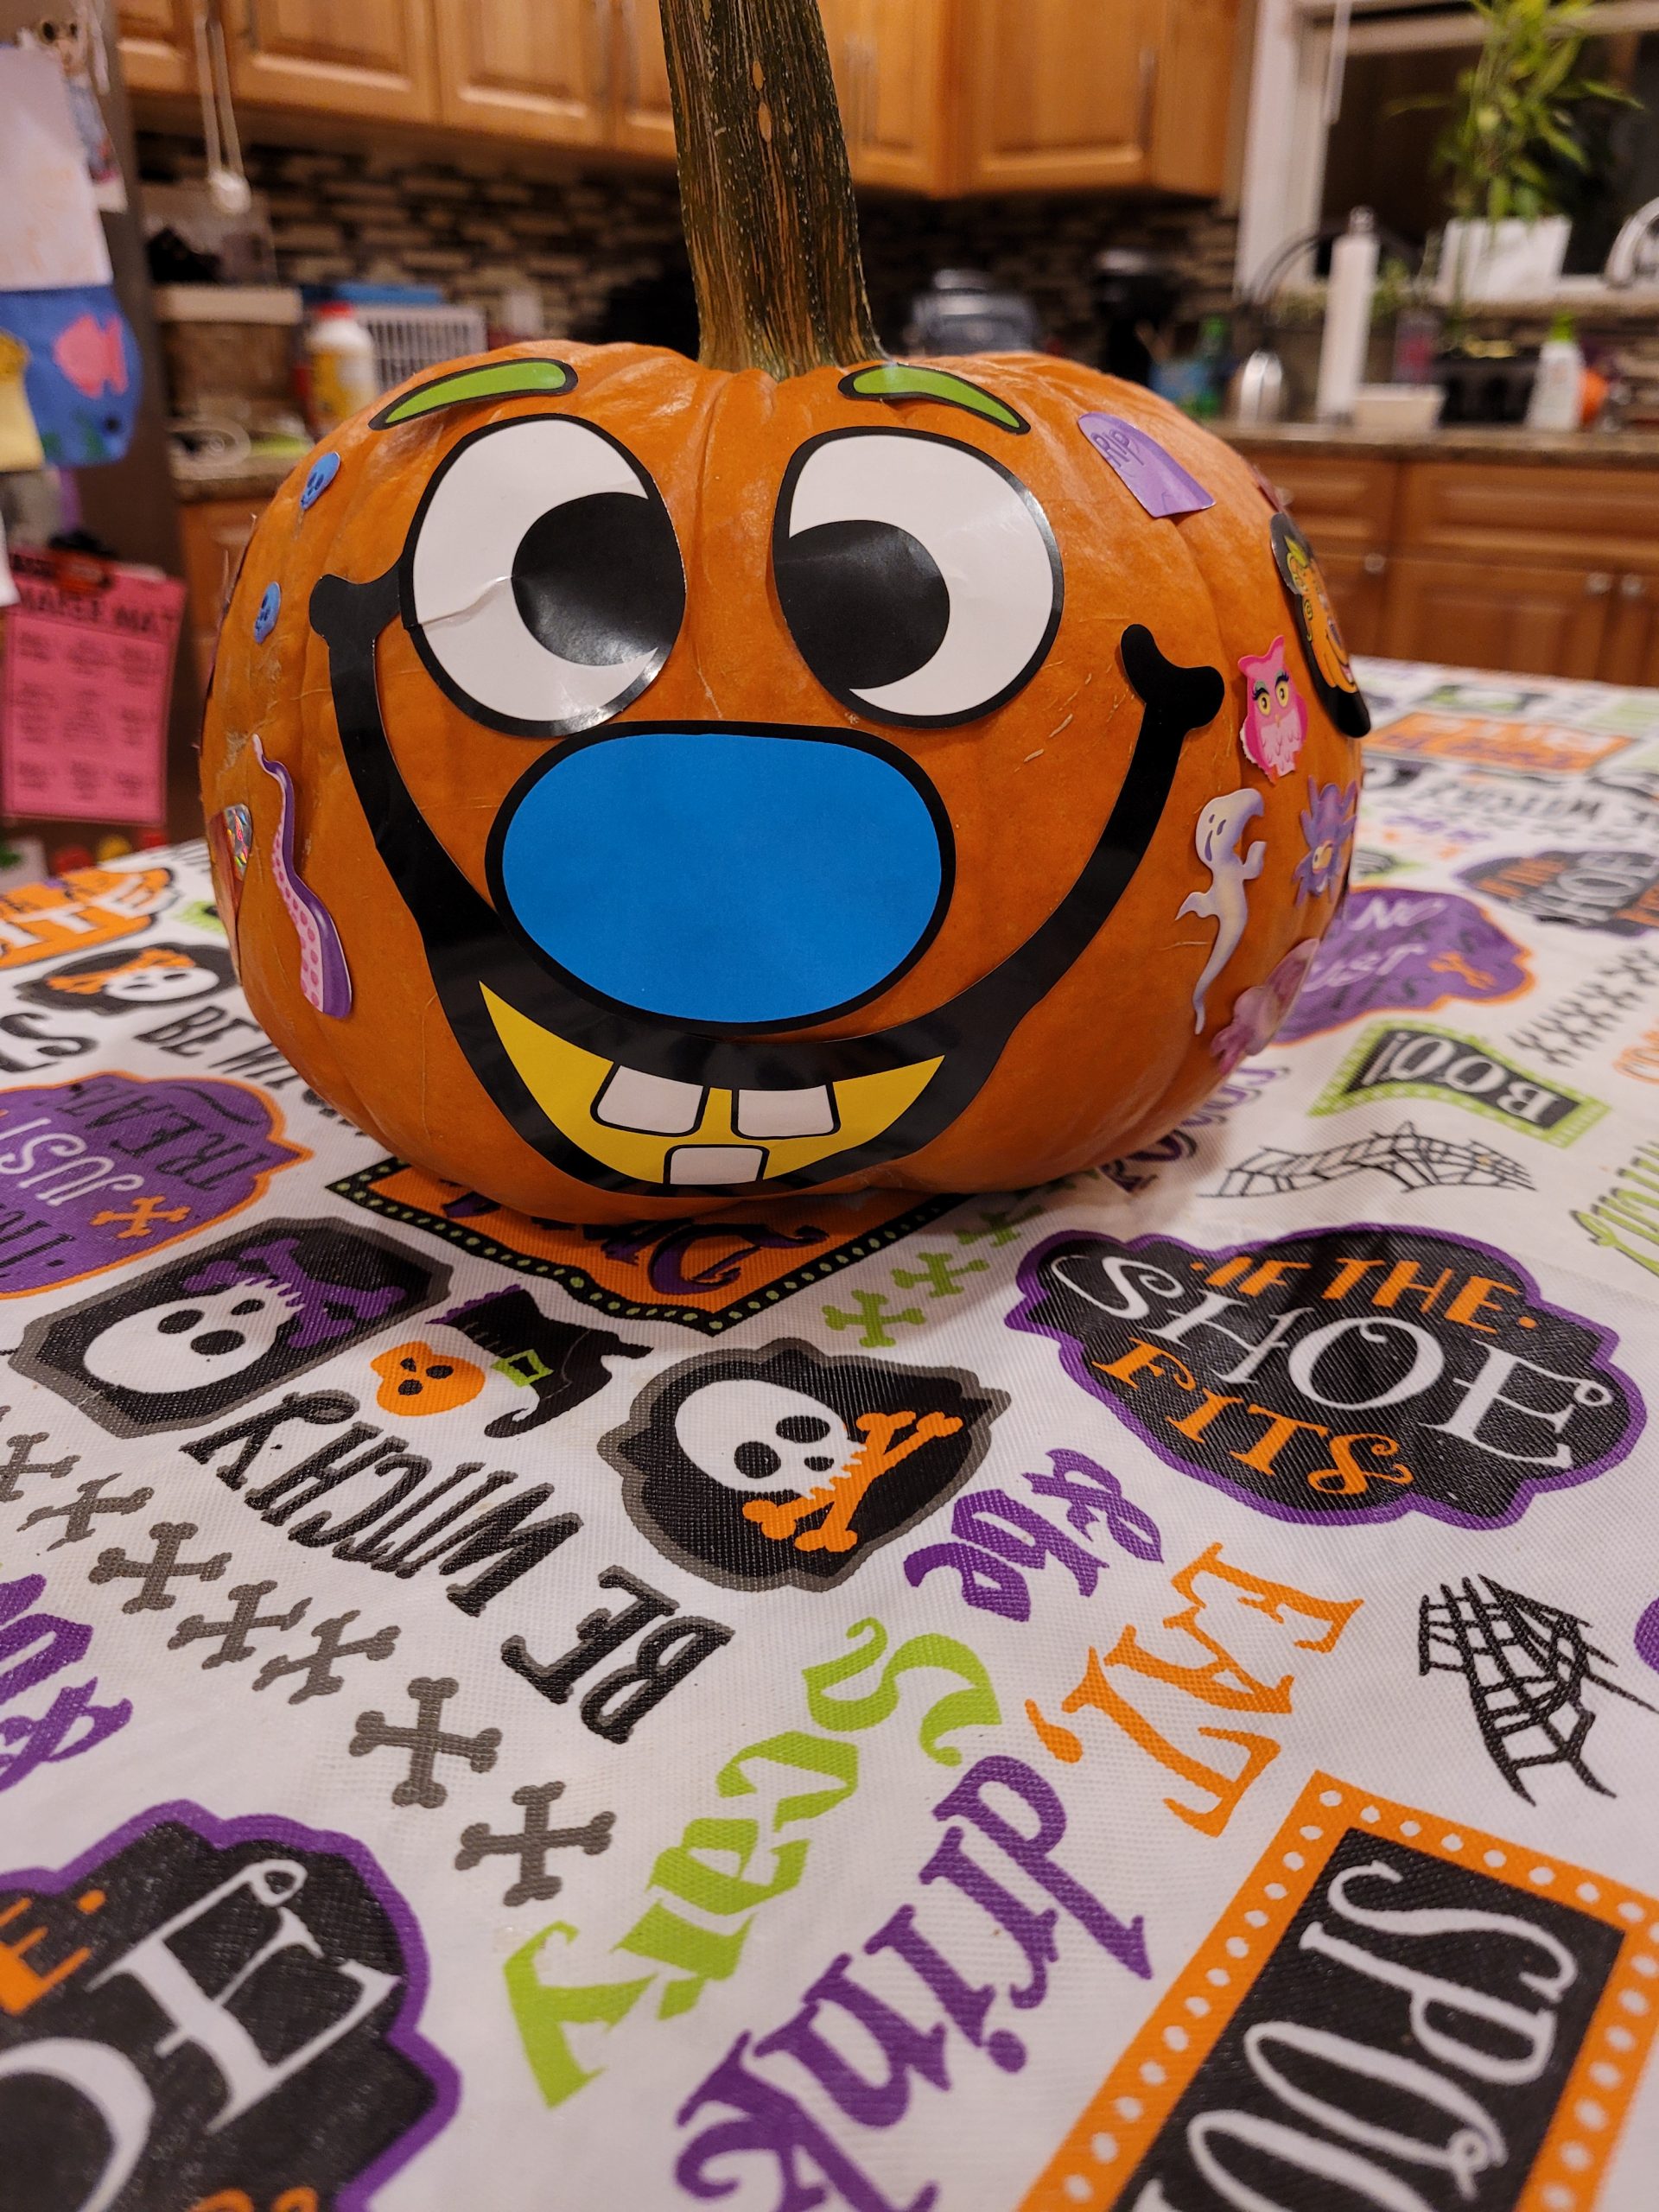 A pumpkin decorated with a funny face on a table